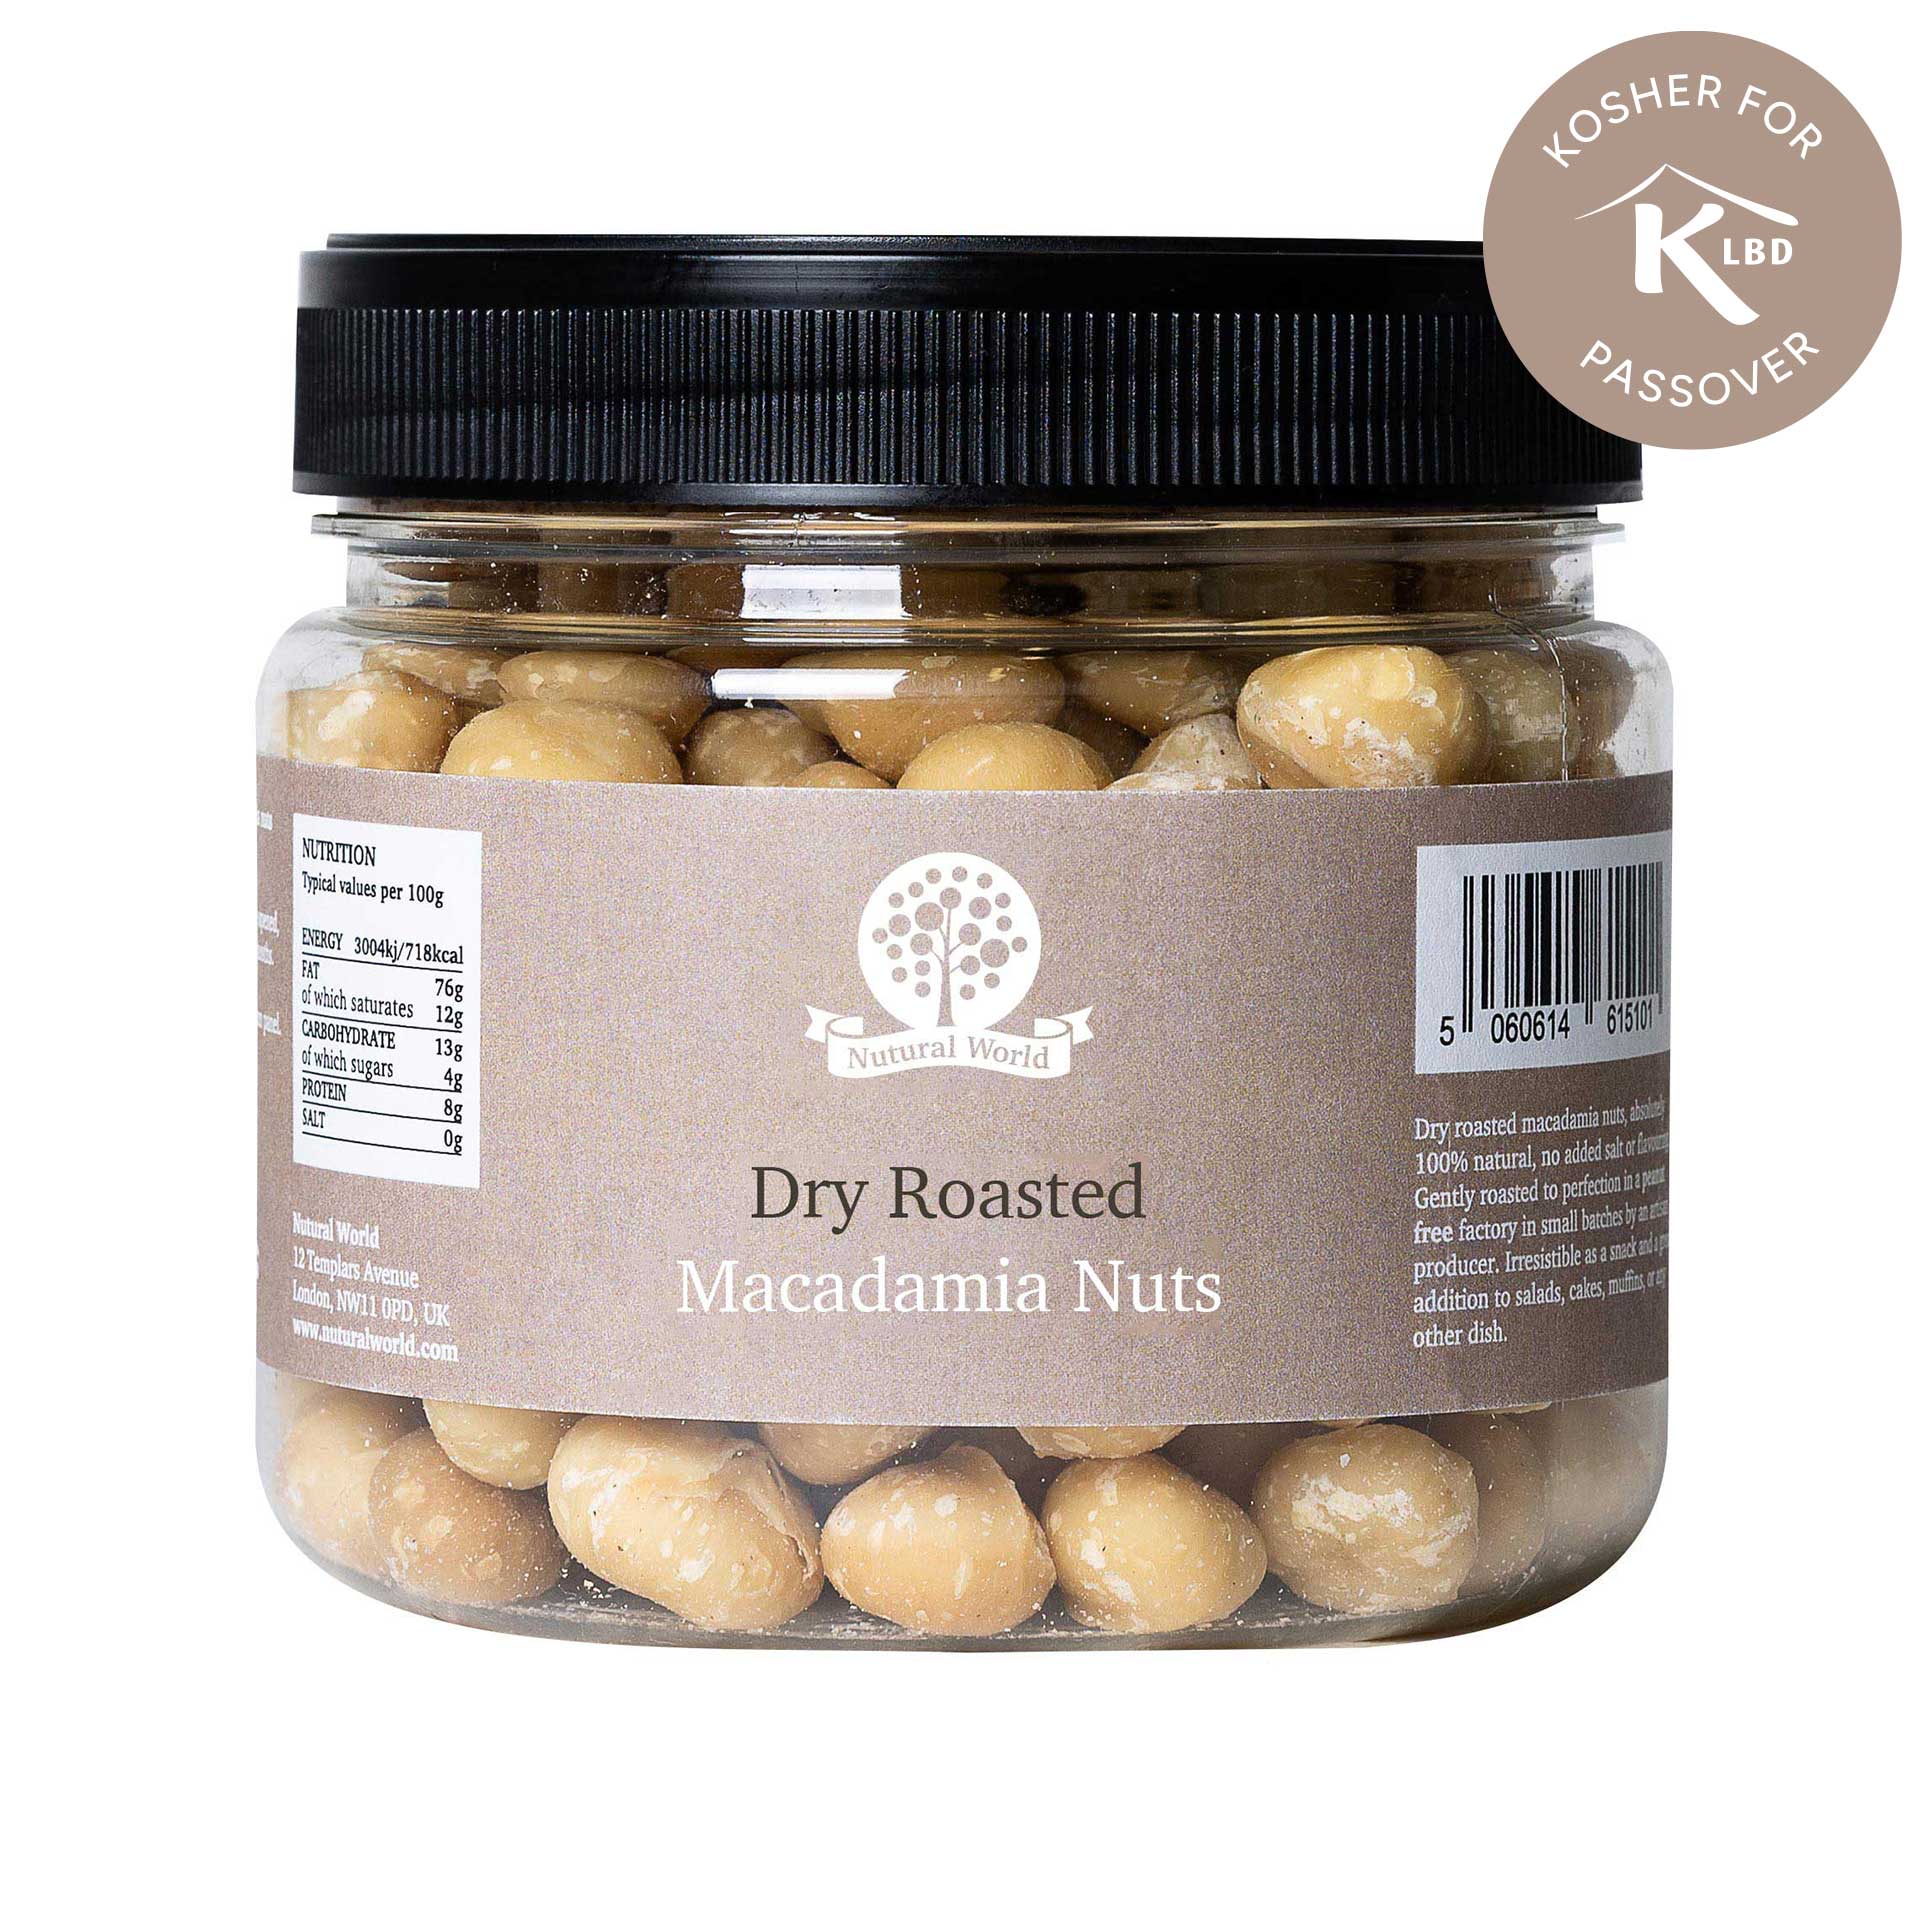 Dry Roasted Macadamia Nuts - Unsalted (500g) - Kosher for Passover